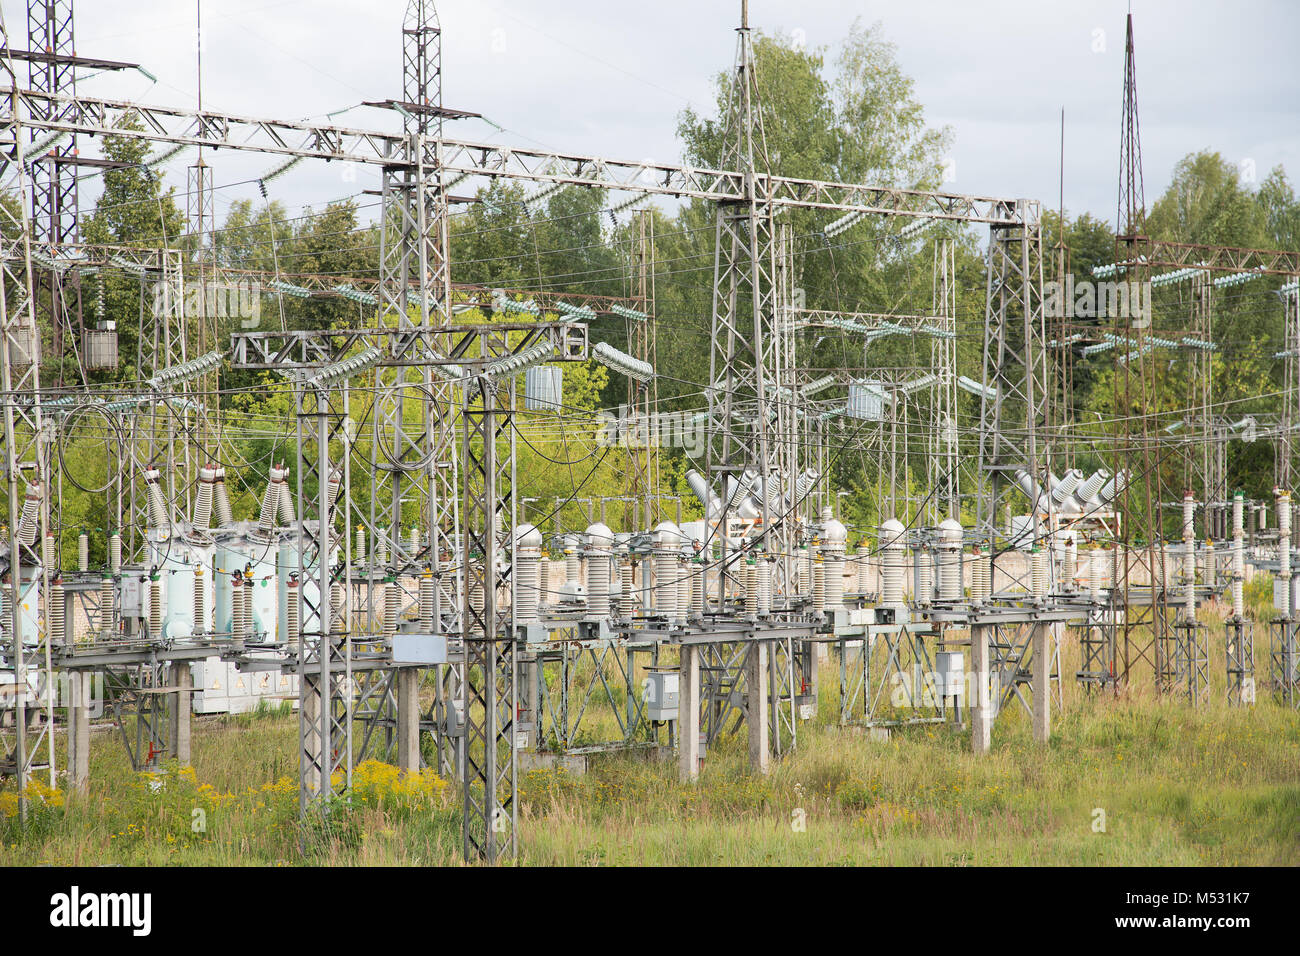 Electrical substation poles and wires summer day Stock Photo